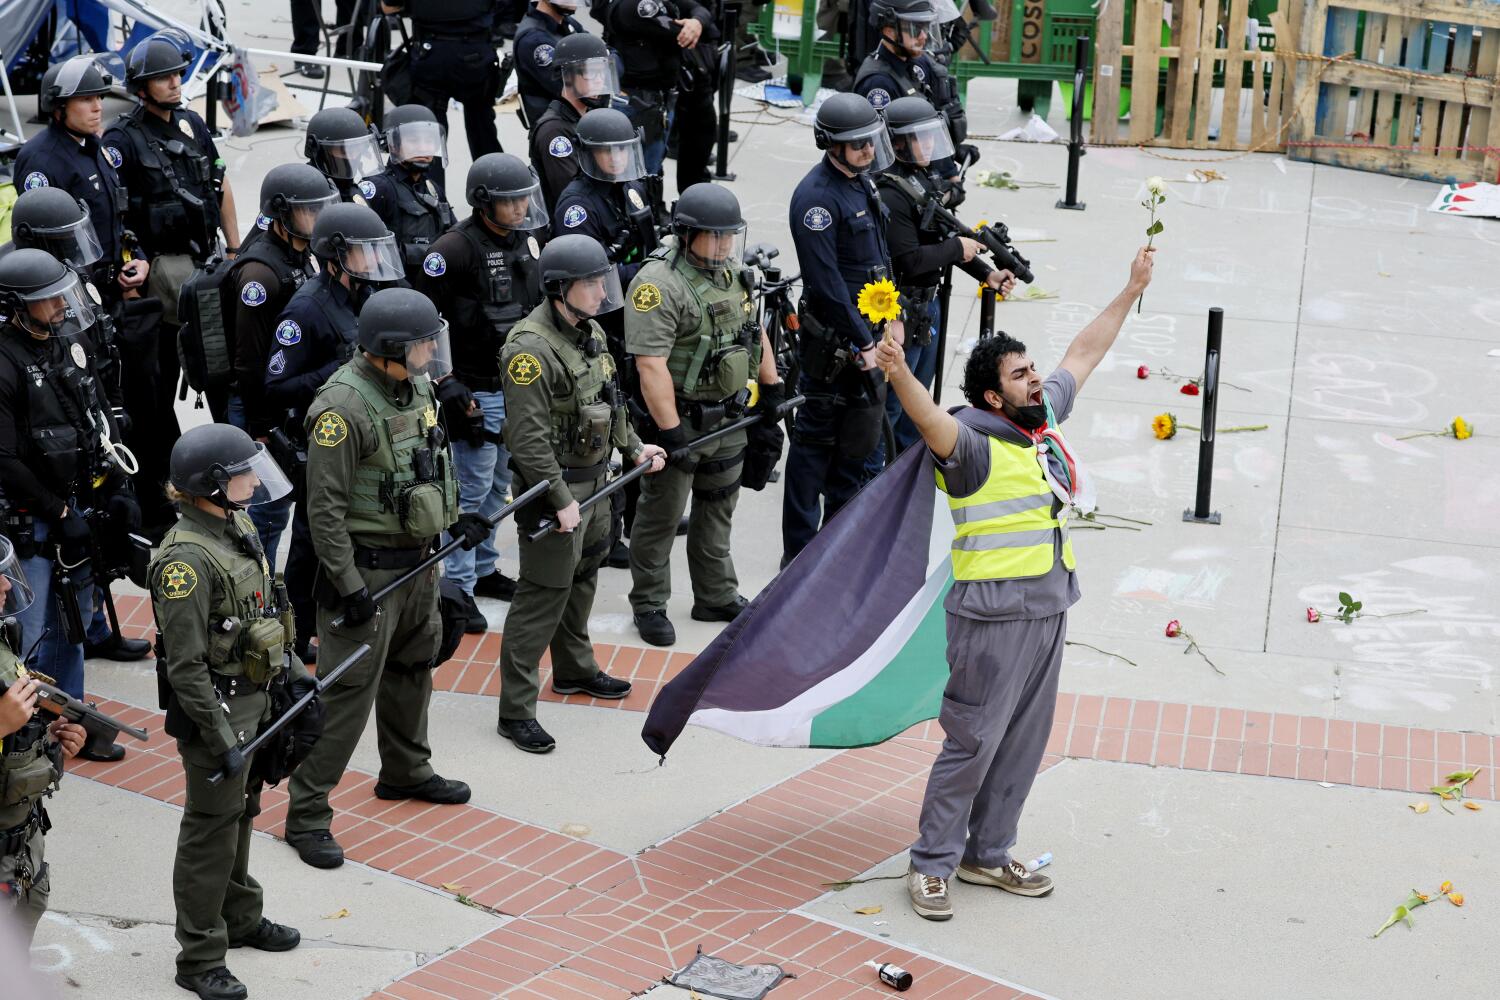 Photos: Authorities move in to clear Pro-Palestinian protesters from UC Irvine